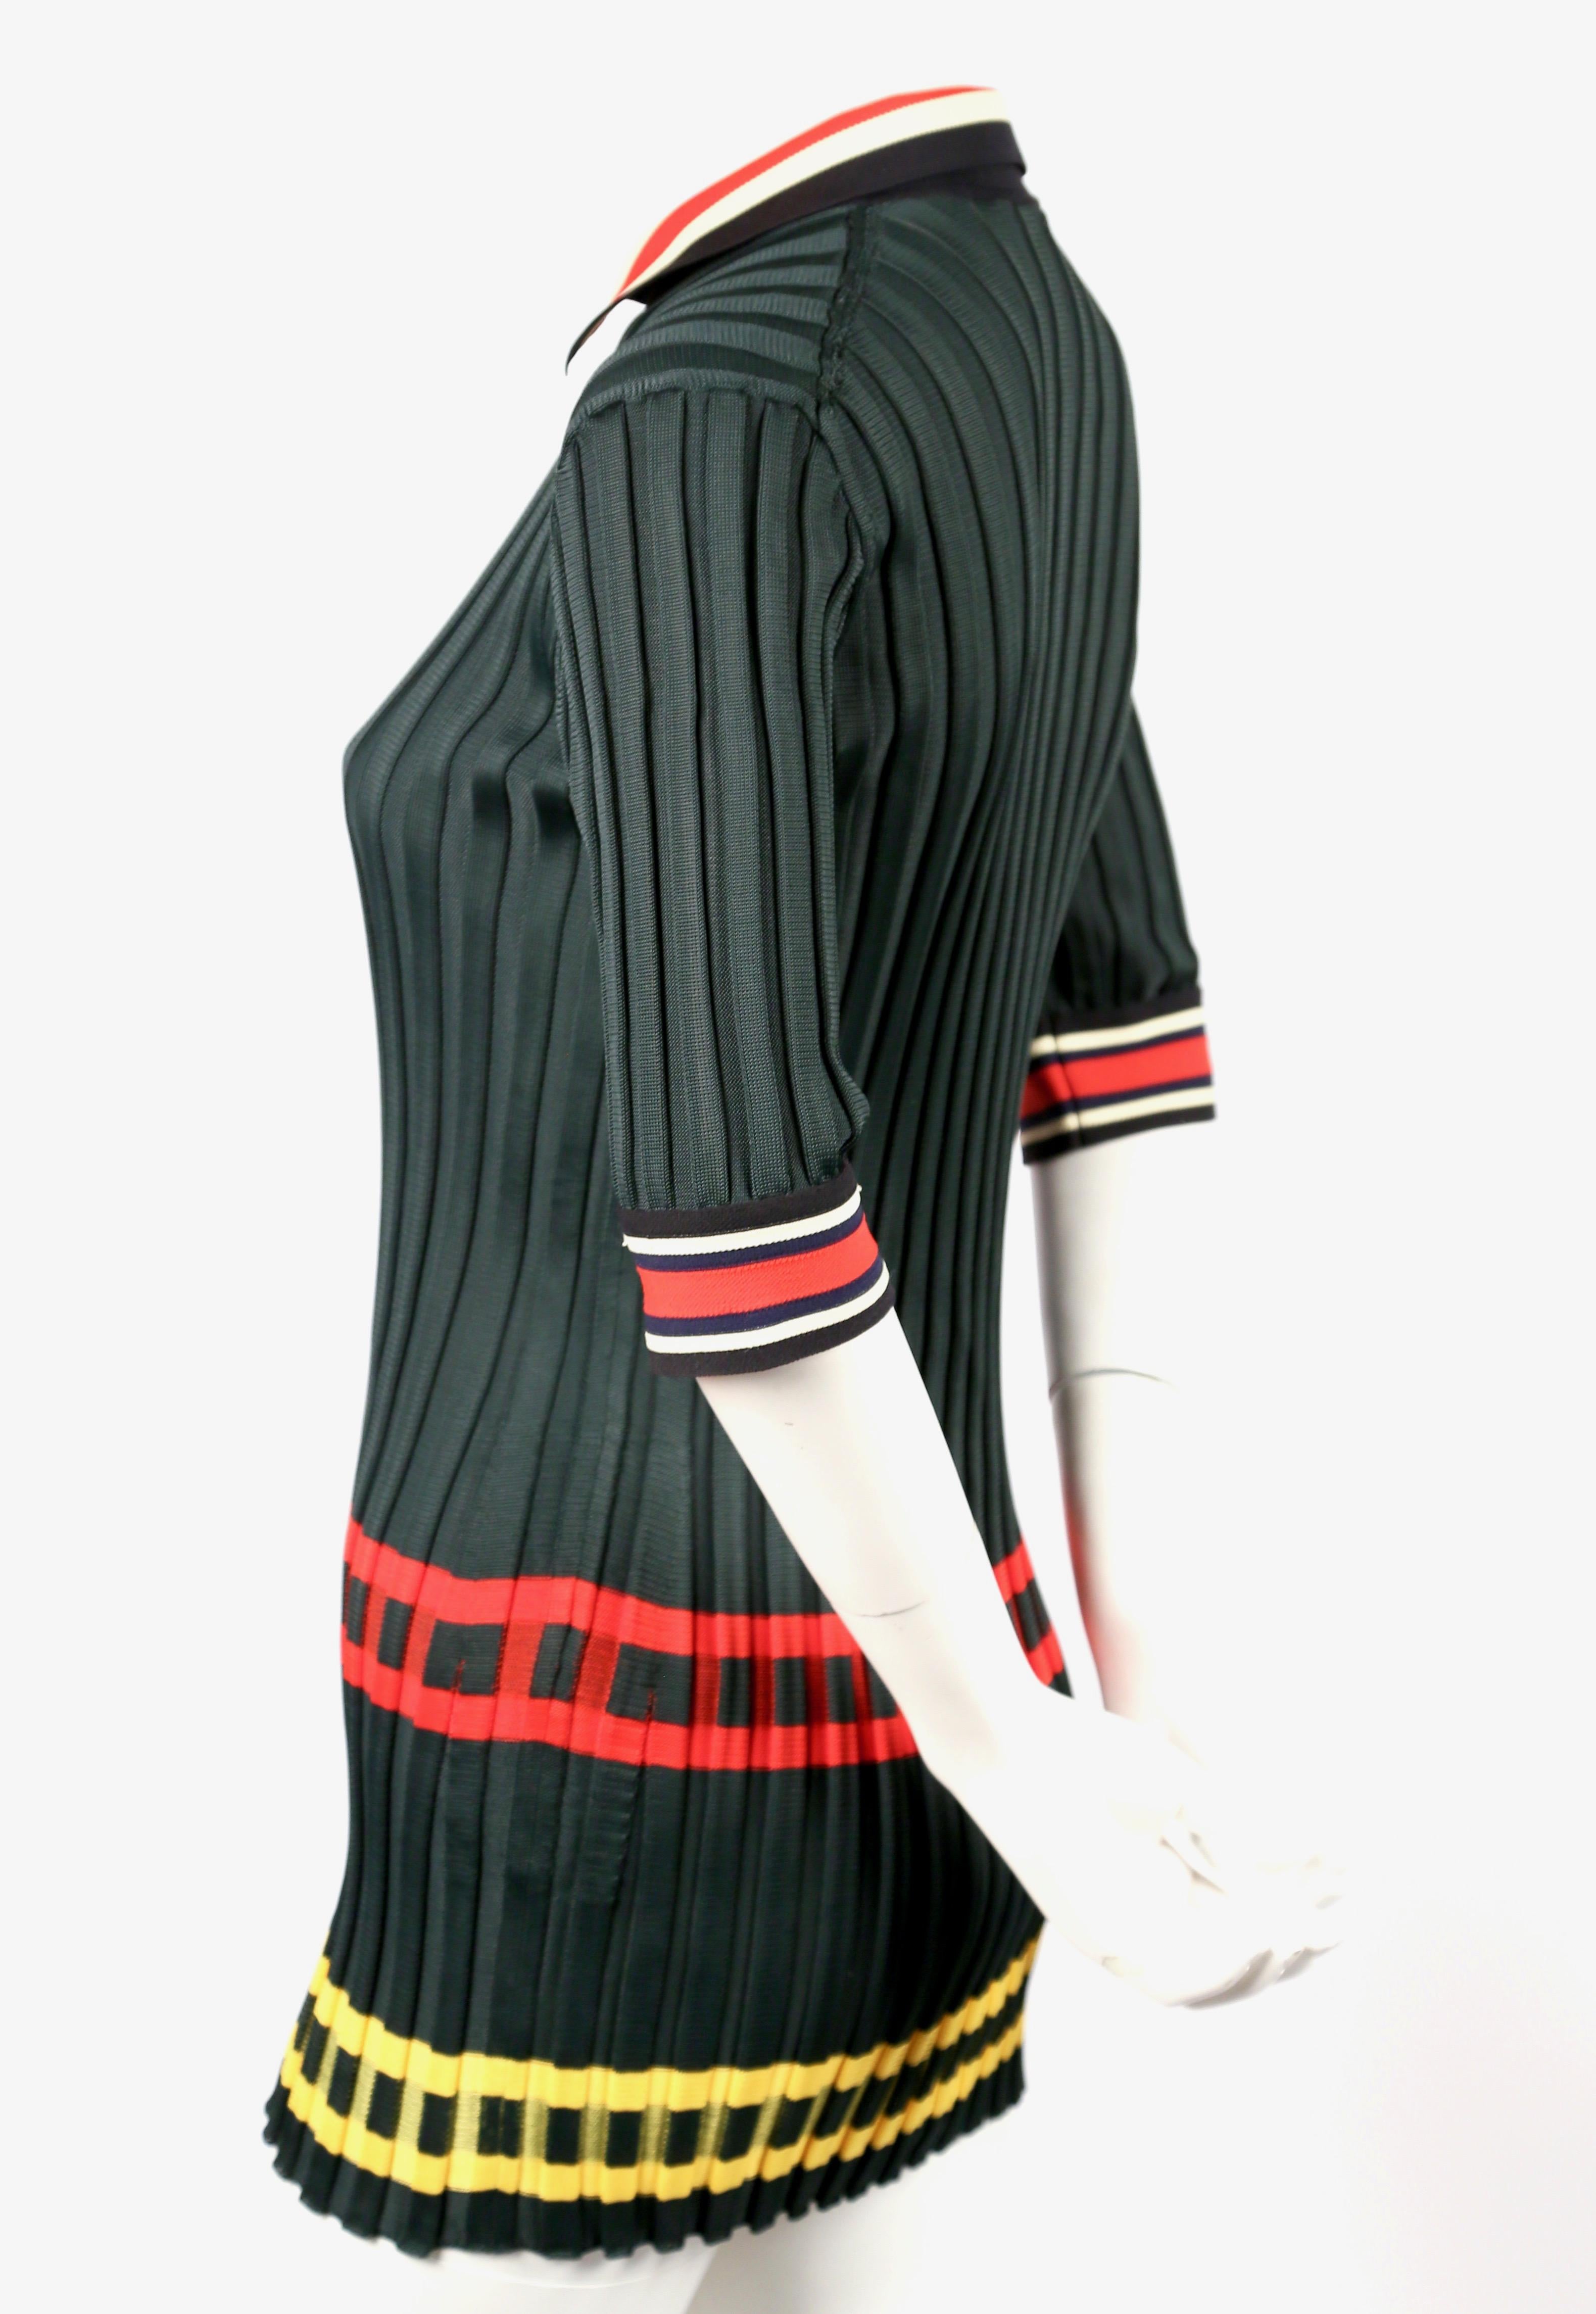 Deep-green, ribbed tunic with red and yellow stripes designed by Phoebe Philo for Celine dating to spring of 2014, exactly as seen on the runway. French size S. Approximate measurements (unstretched): shoulder 12-13